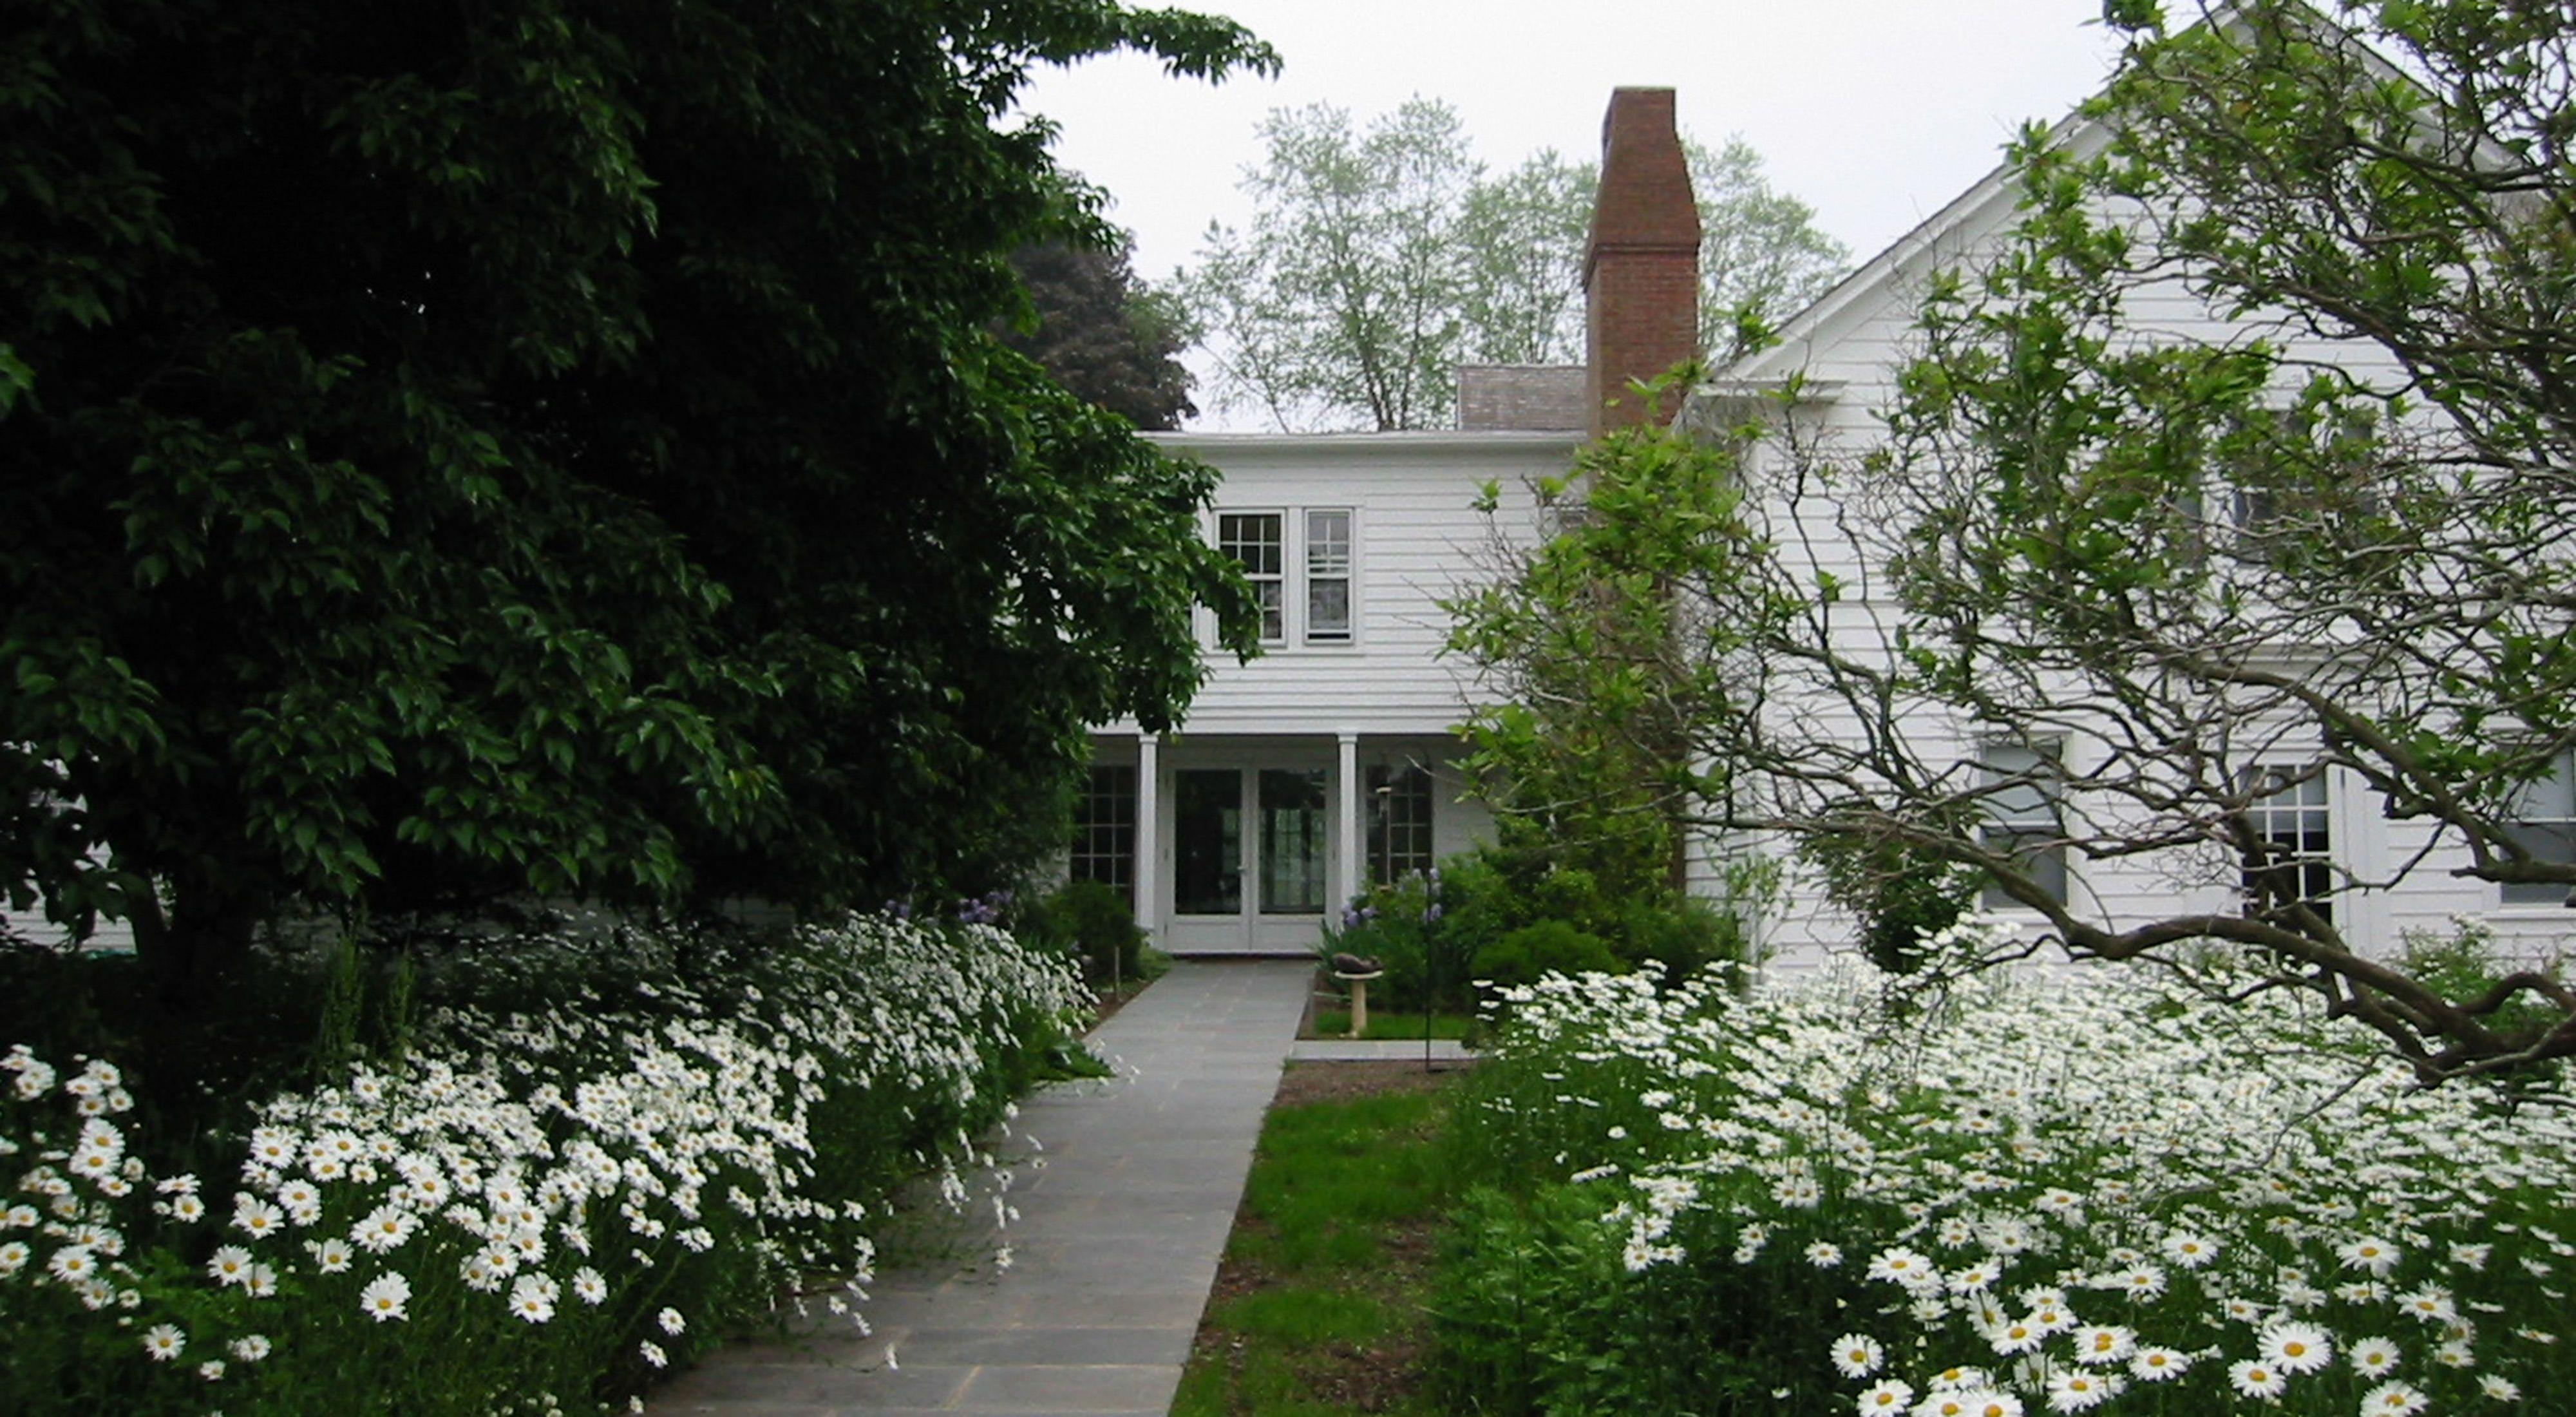 White building behind gardens of white flowers and trees.